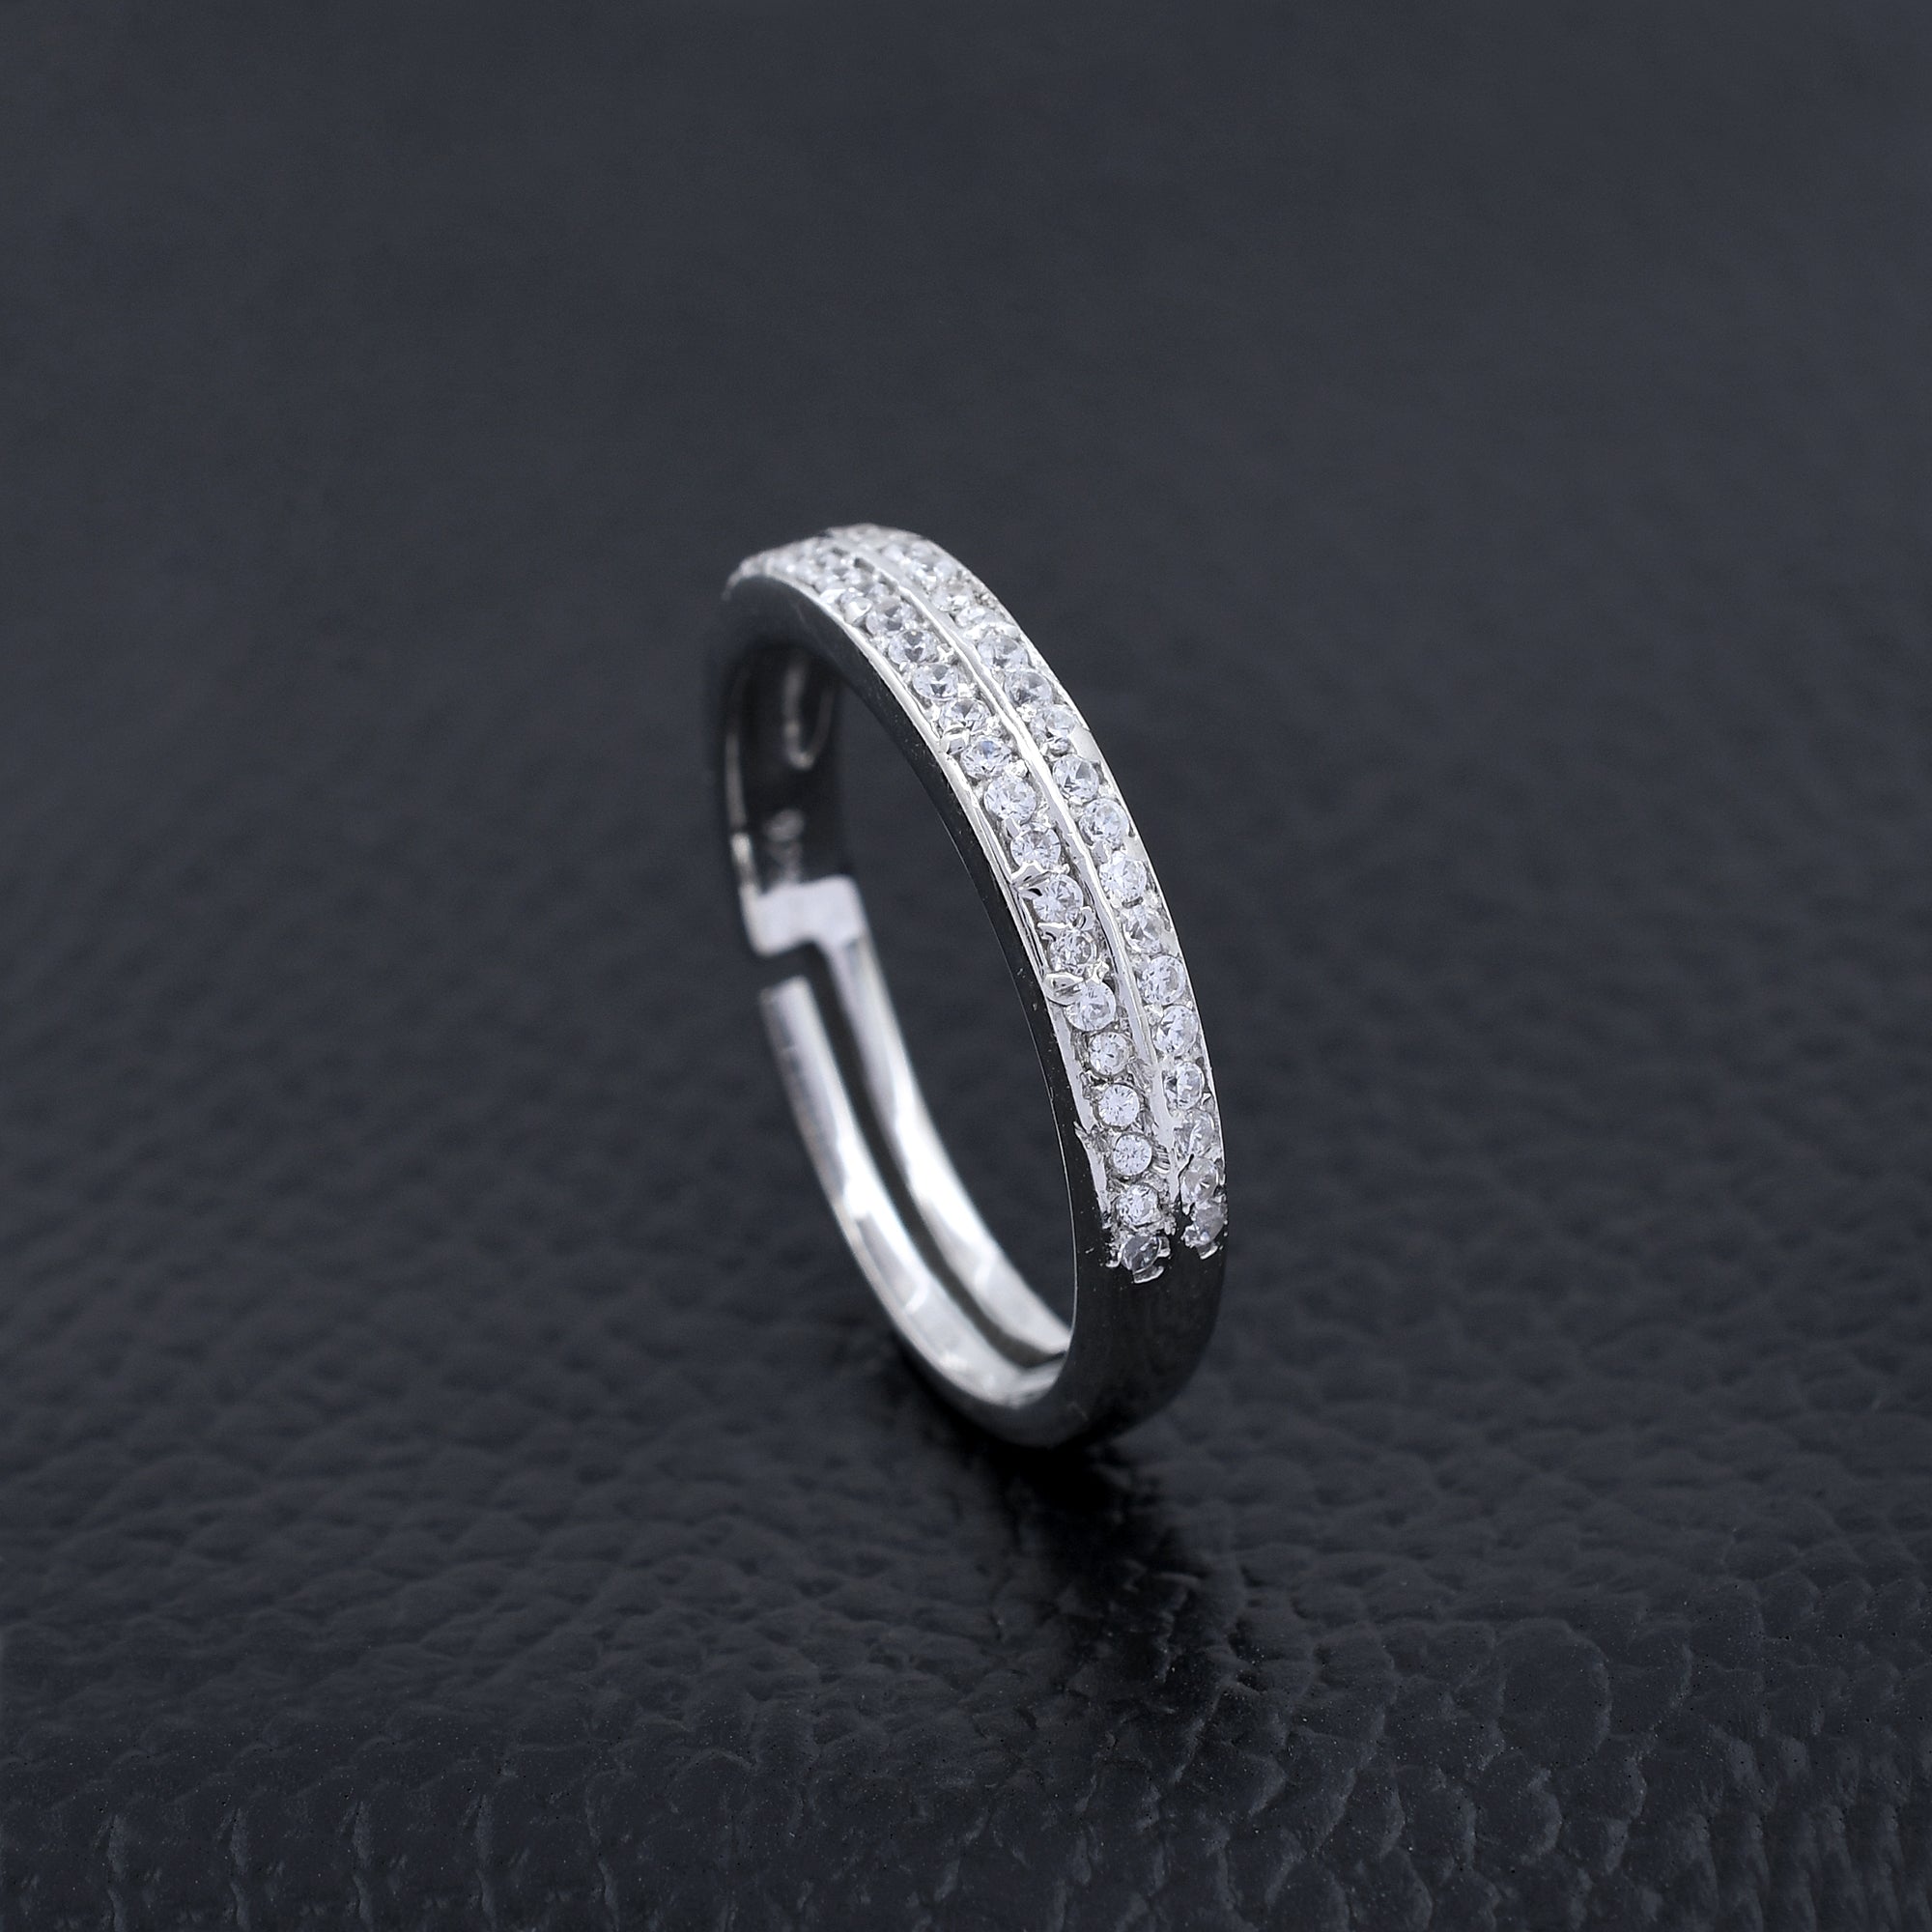 Angelic 925 Sterling Silver Ring